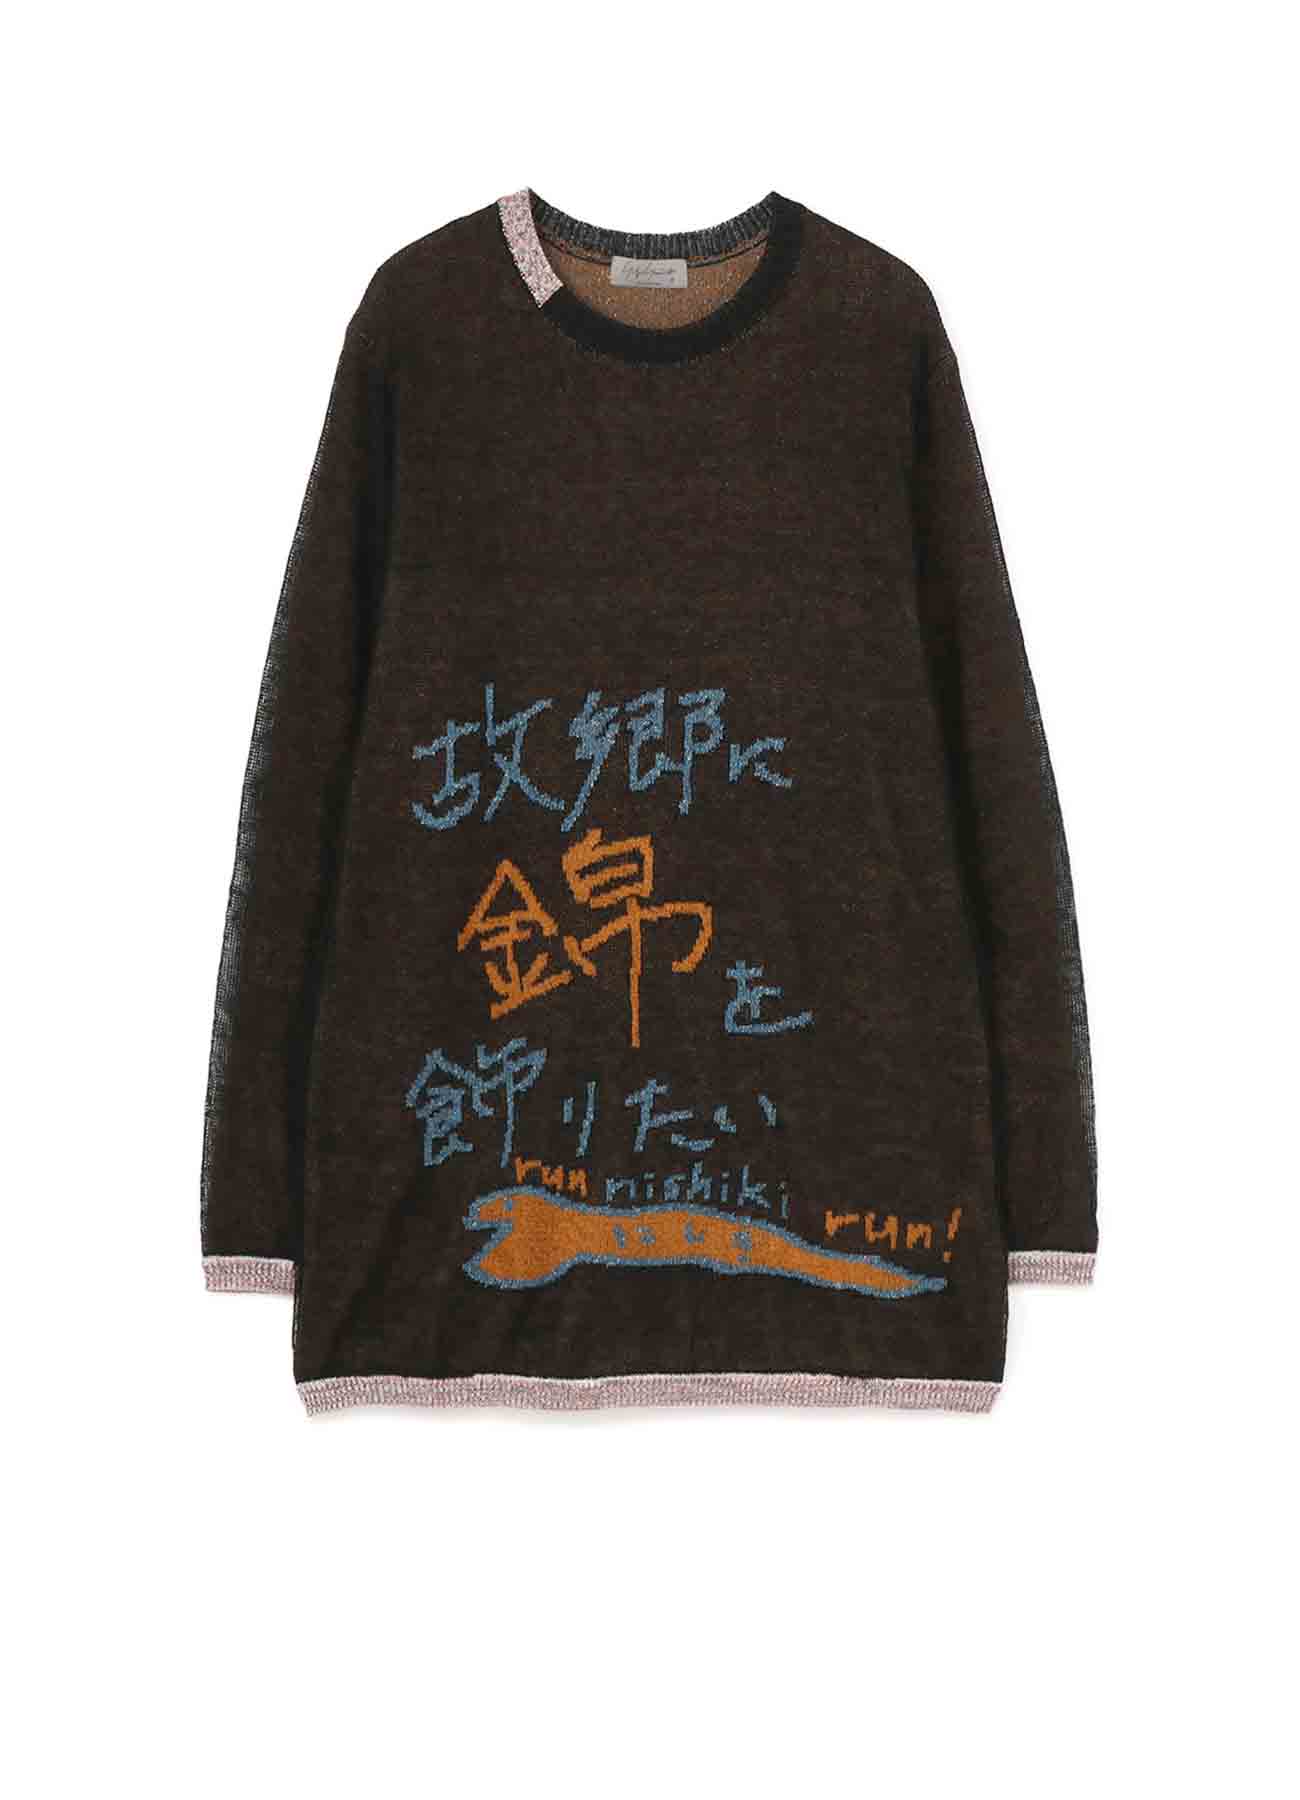 7G MESSAGE JACQUARD PRIZE HOME TOWN LONG SLEEVES